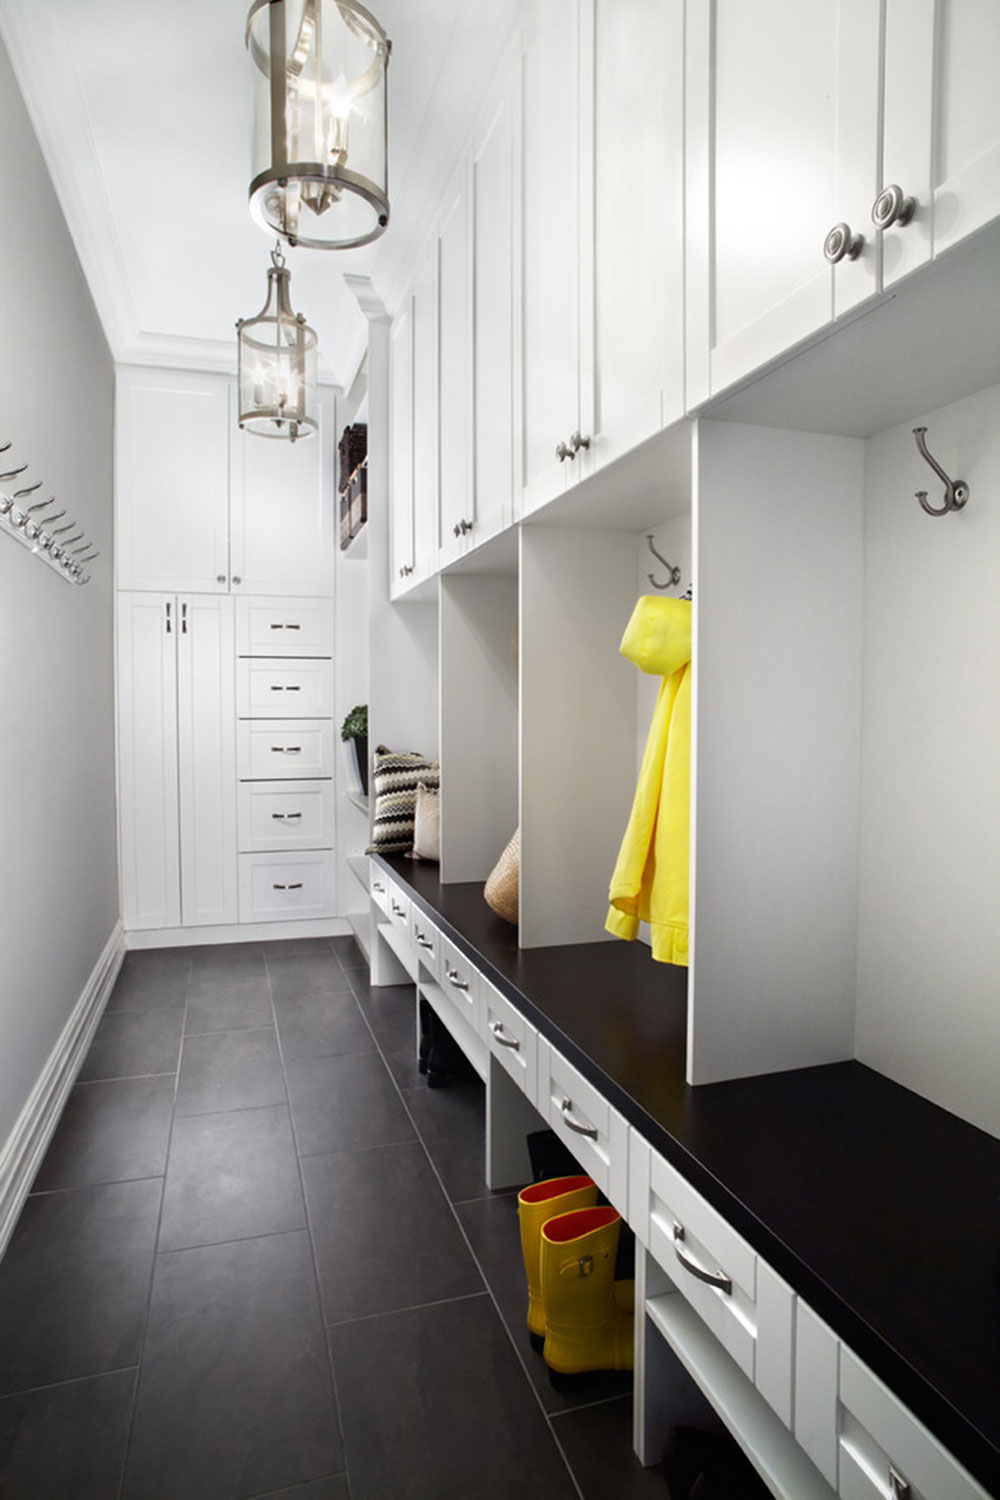 Clean-Your-House-With-These-Mudroom-Plans6 Clean Your House With These Mudroom Plans